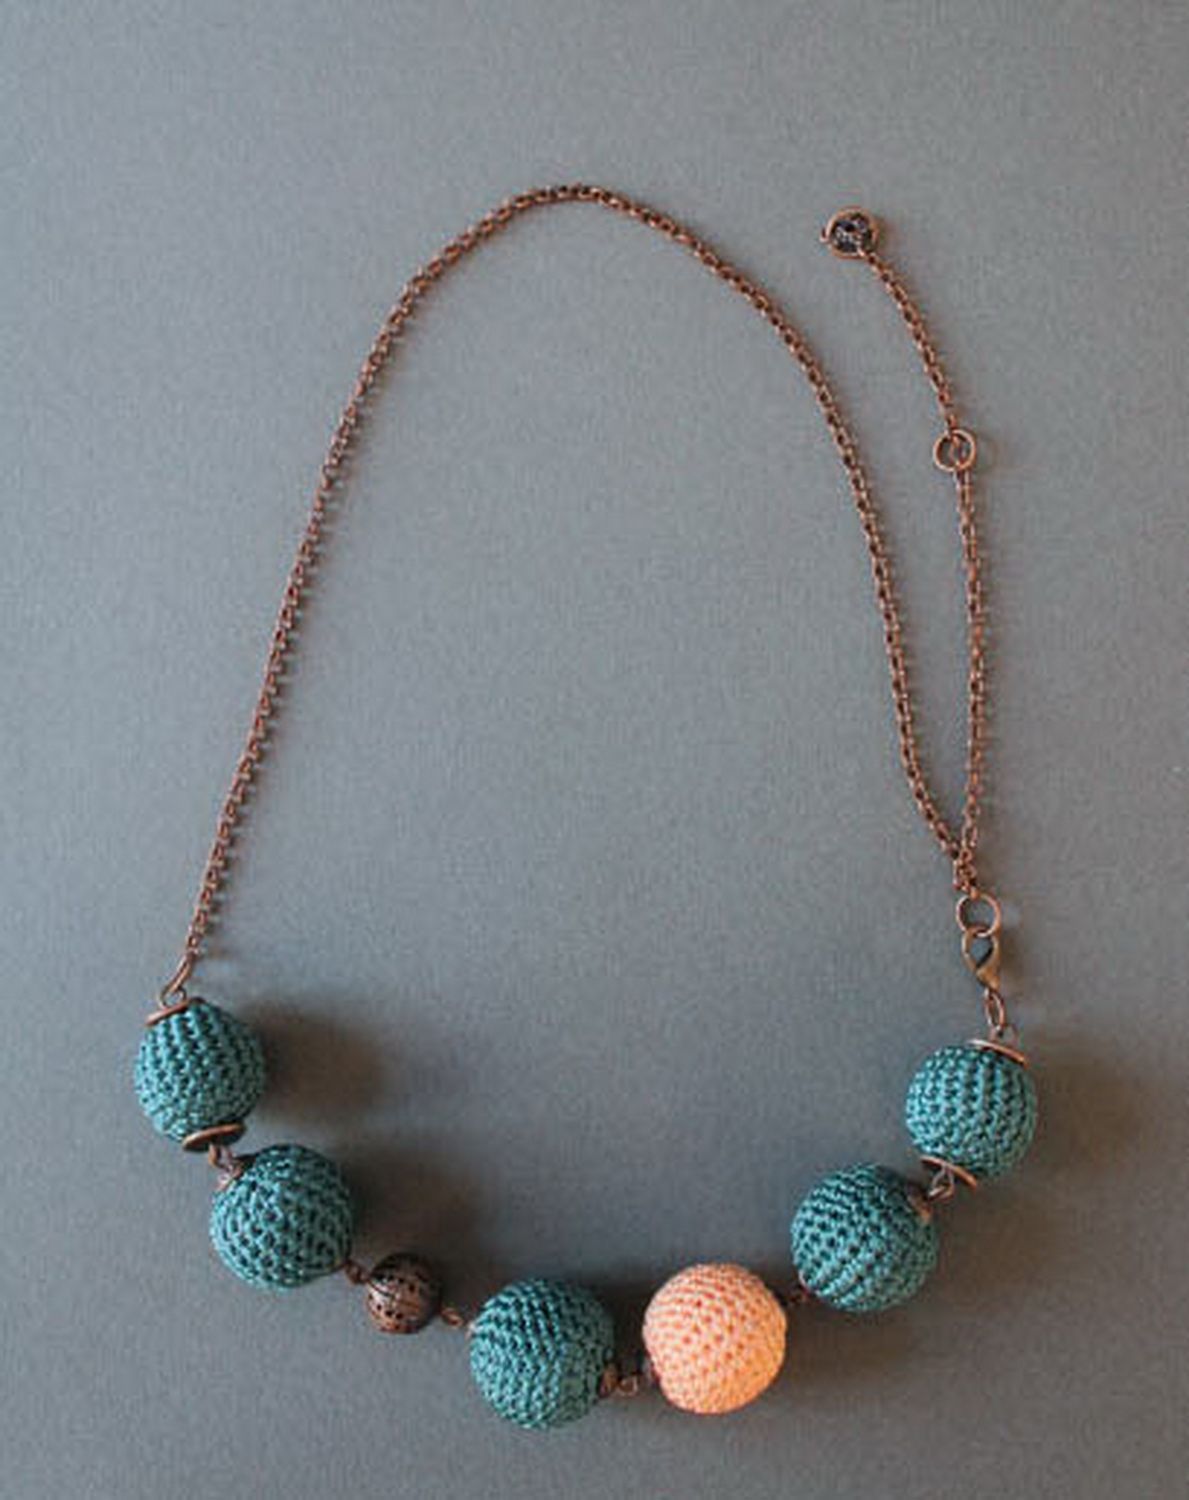 Bead necklace knitted with satin threads photo 7